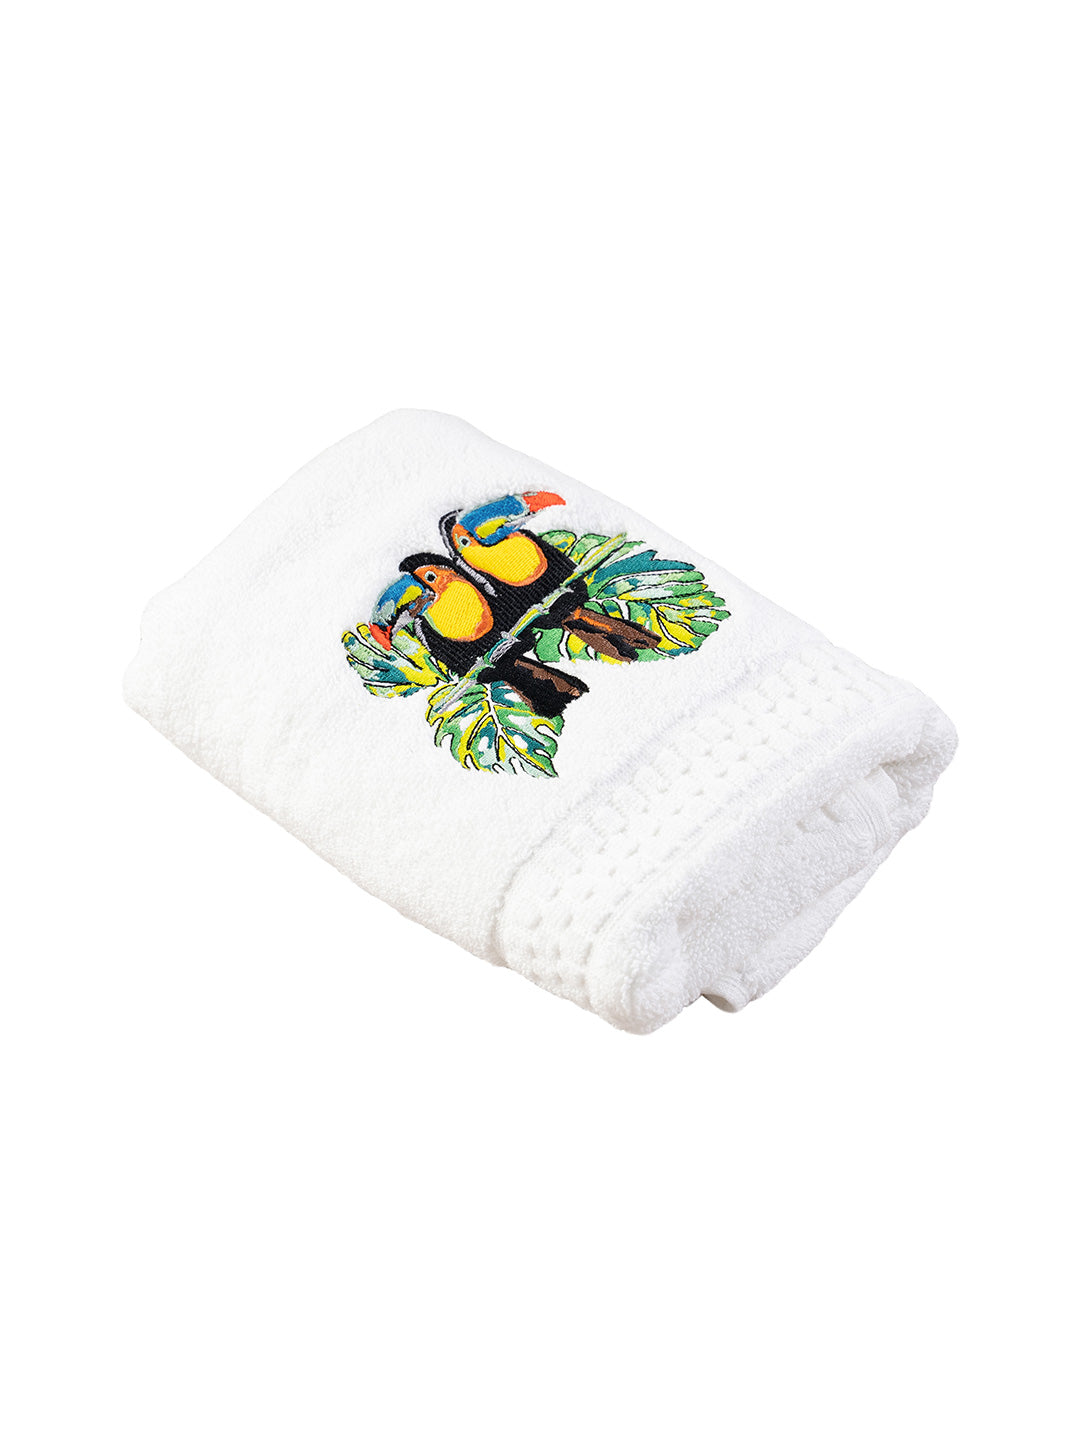 Hand Towels - Tropical Toucan